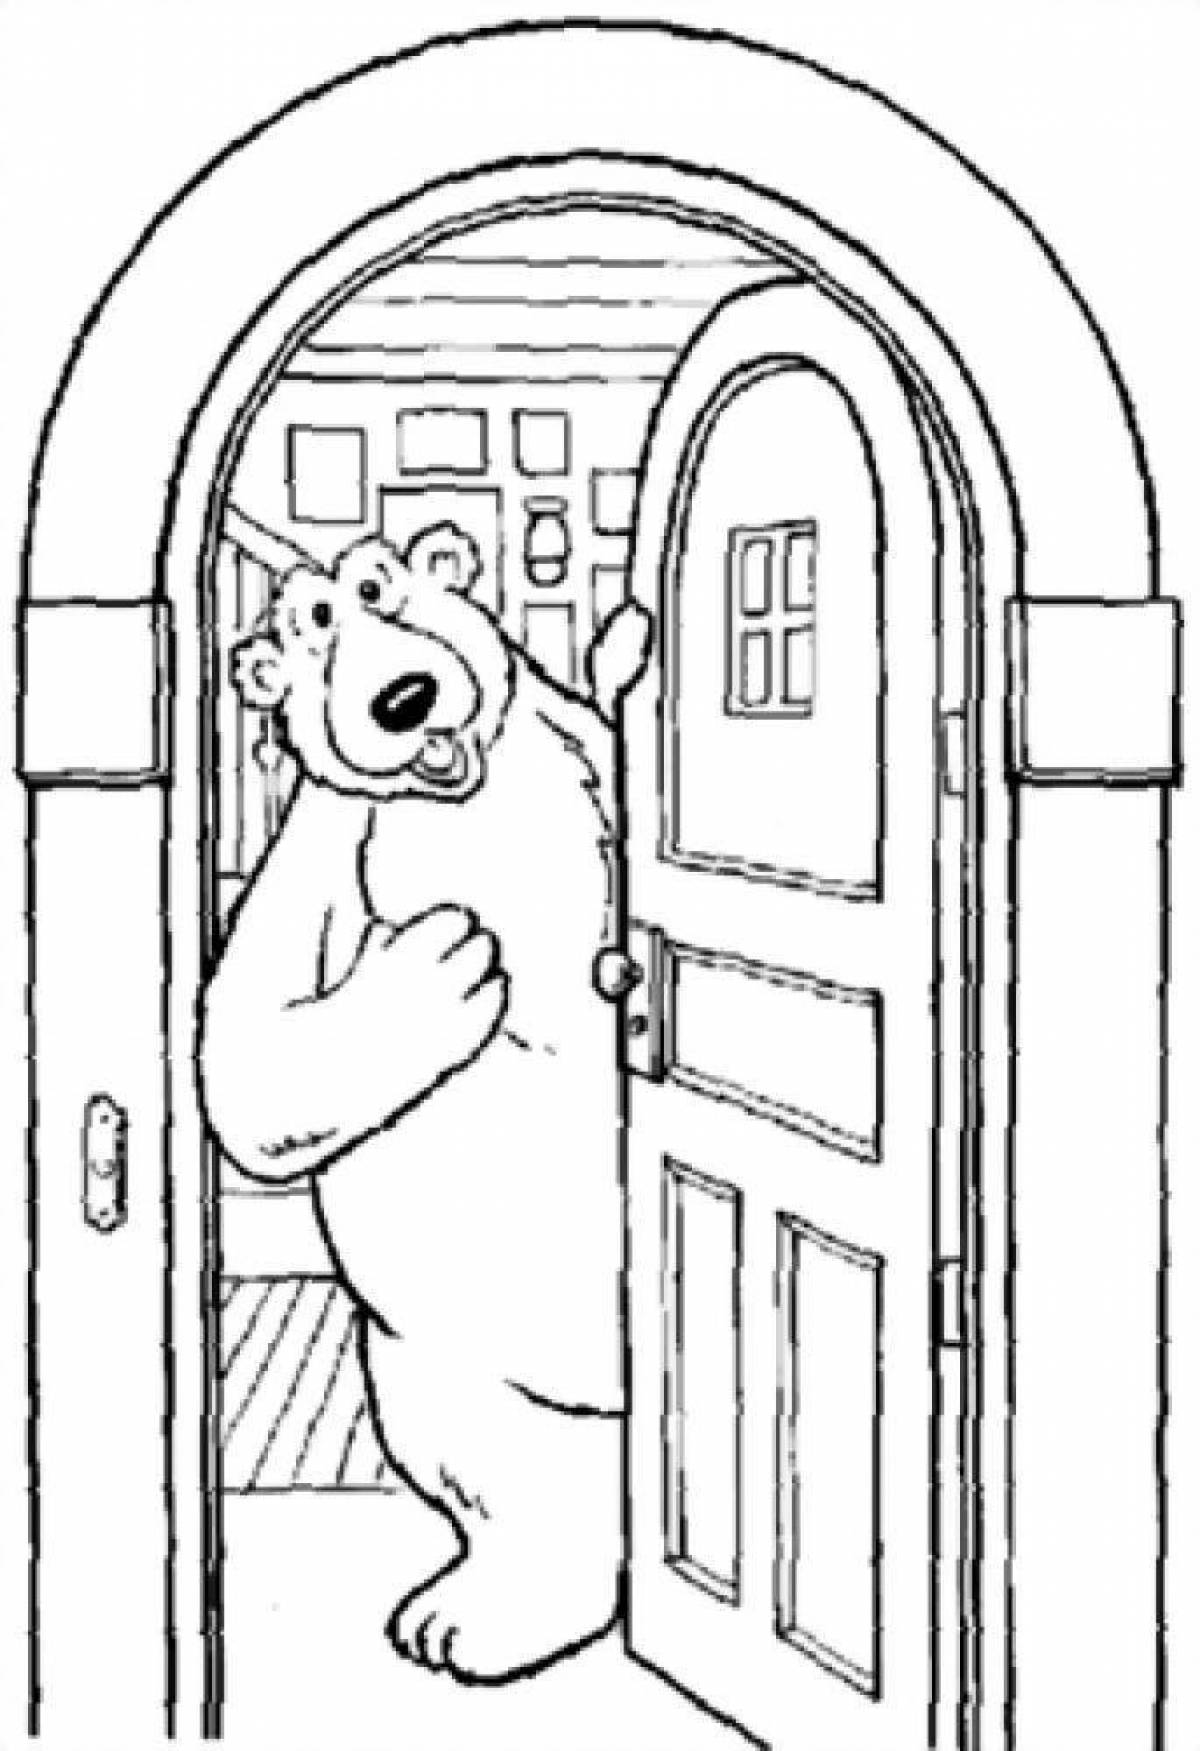 Coloring page bright knock on my door